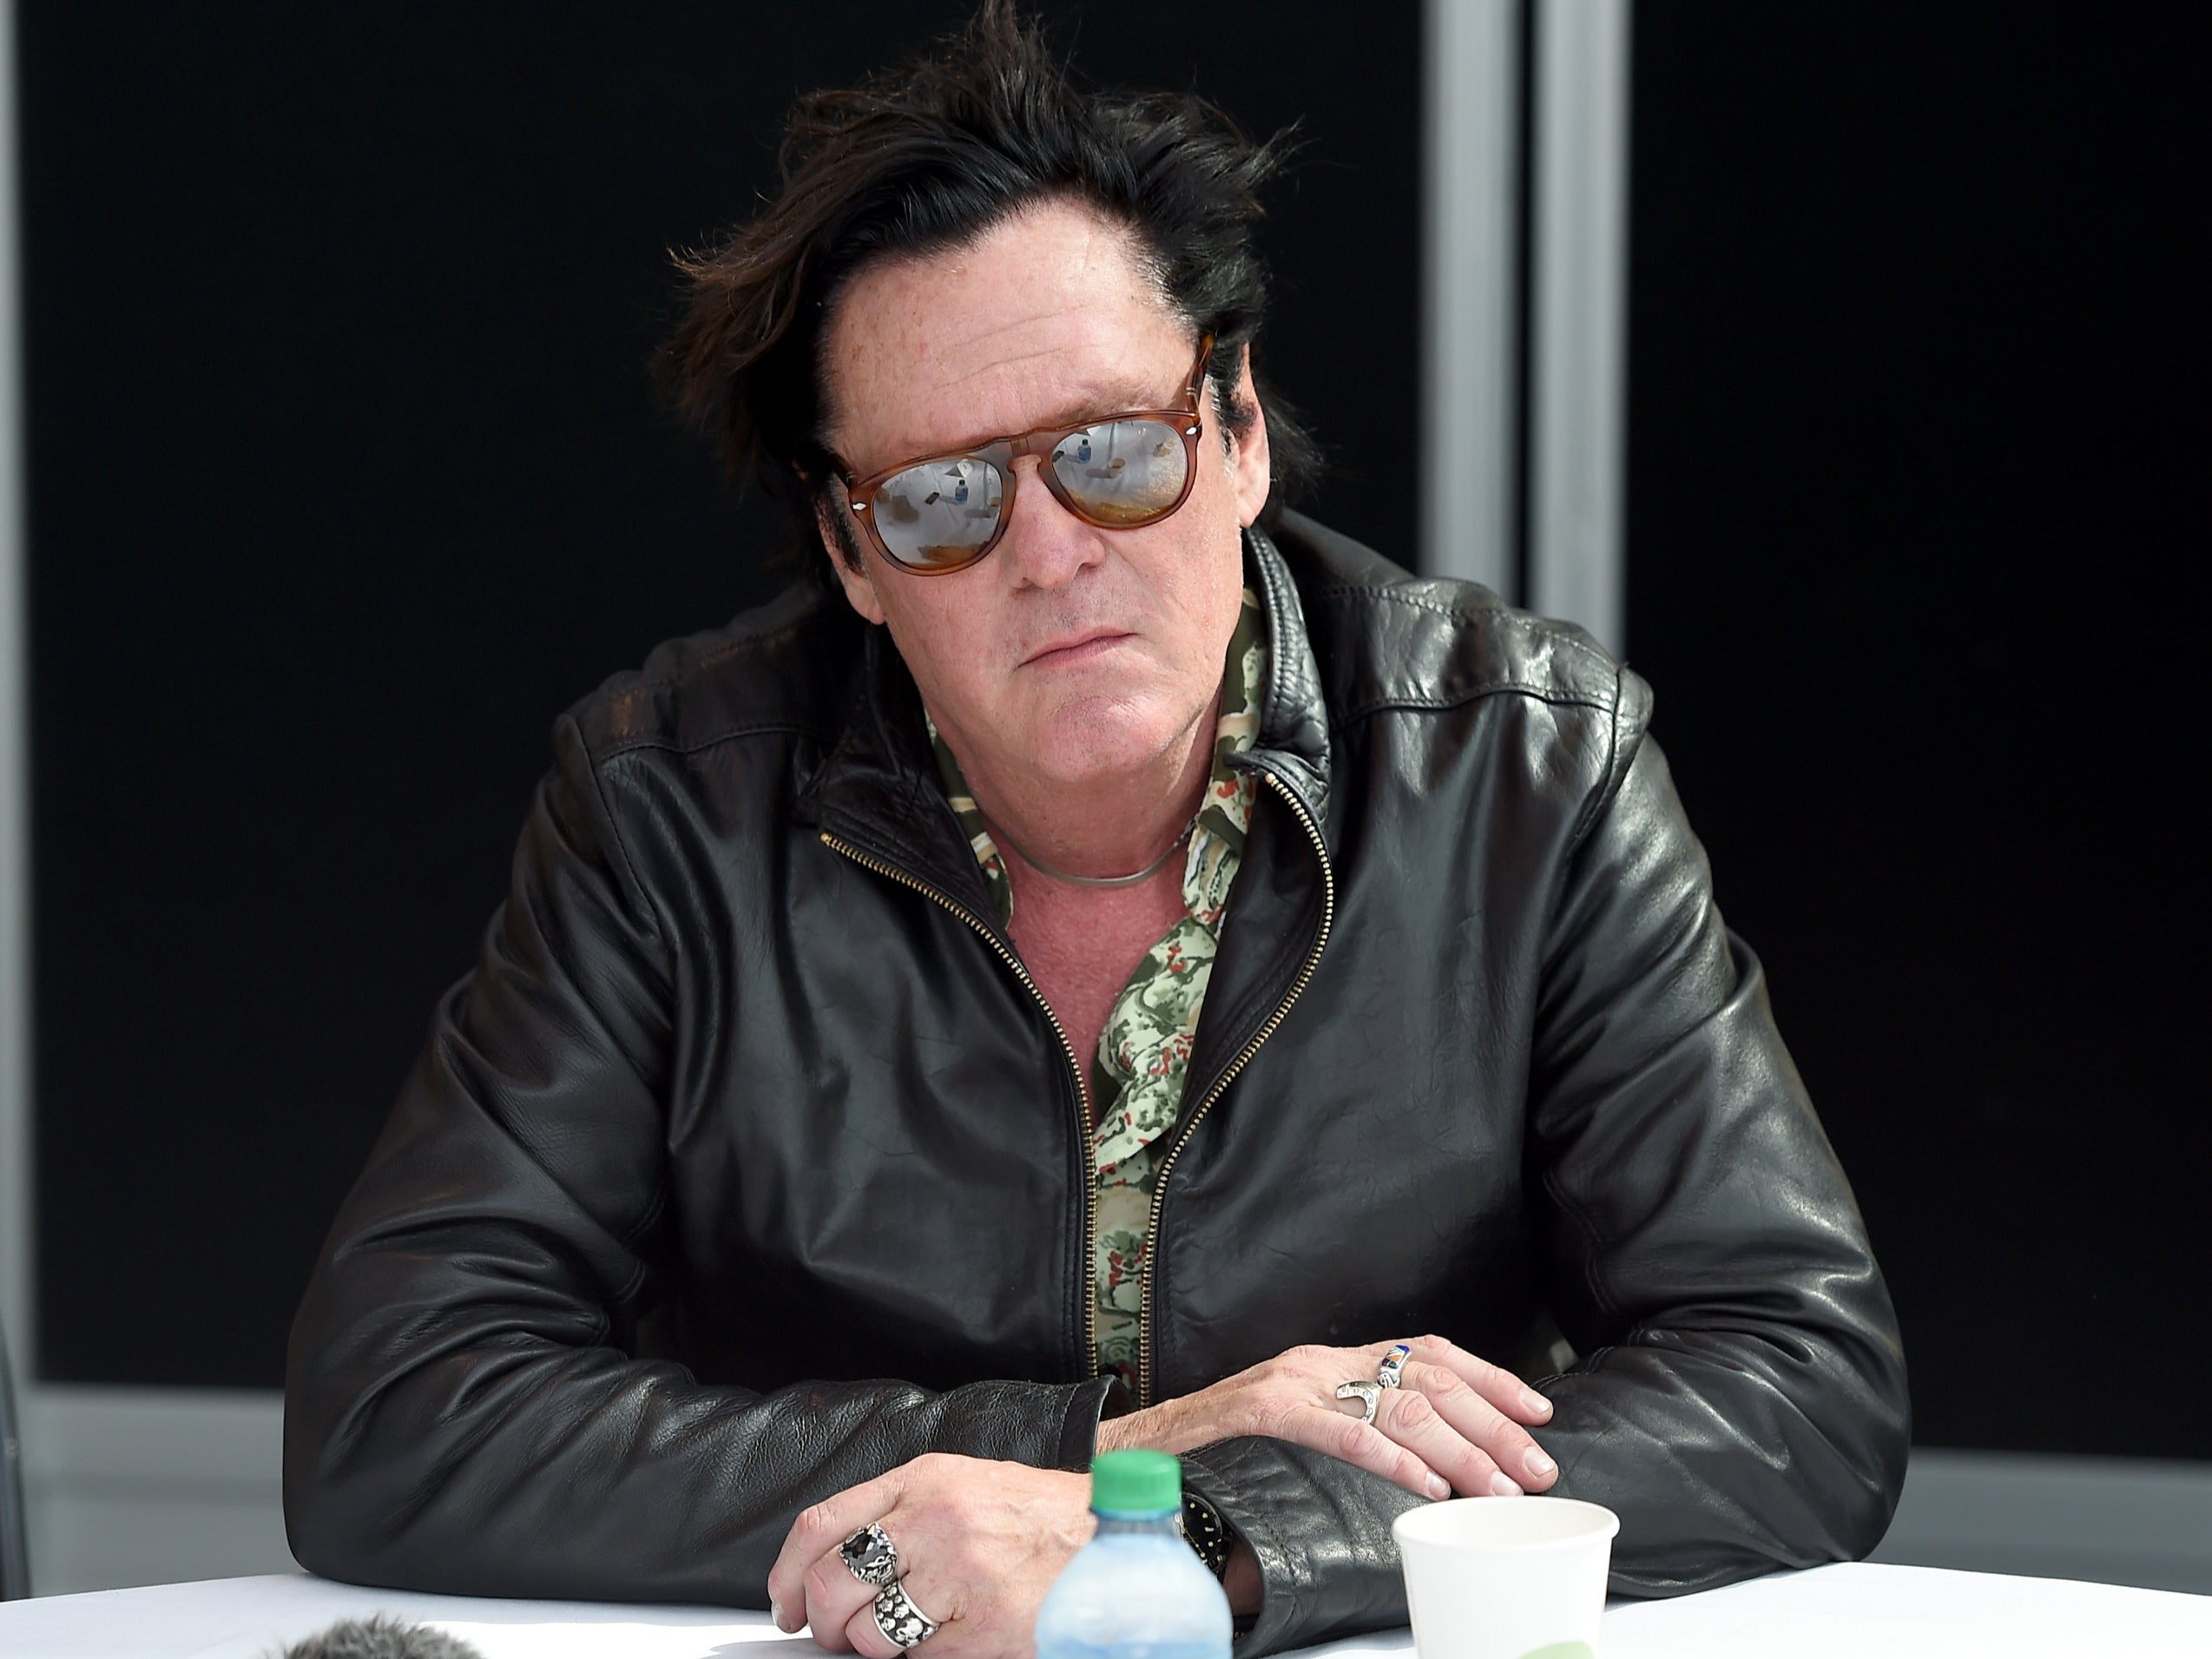 Kill Bill actor Michael Madsen’s son Hudson was living in Hawaii at the time of his death